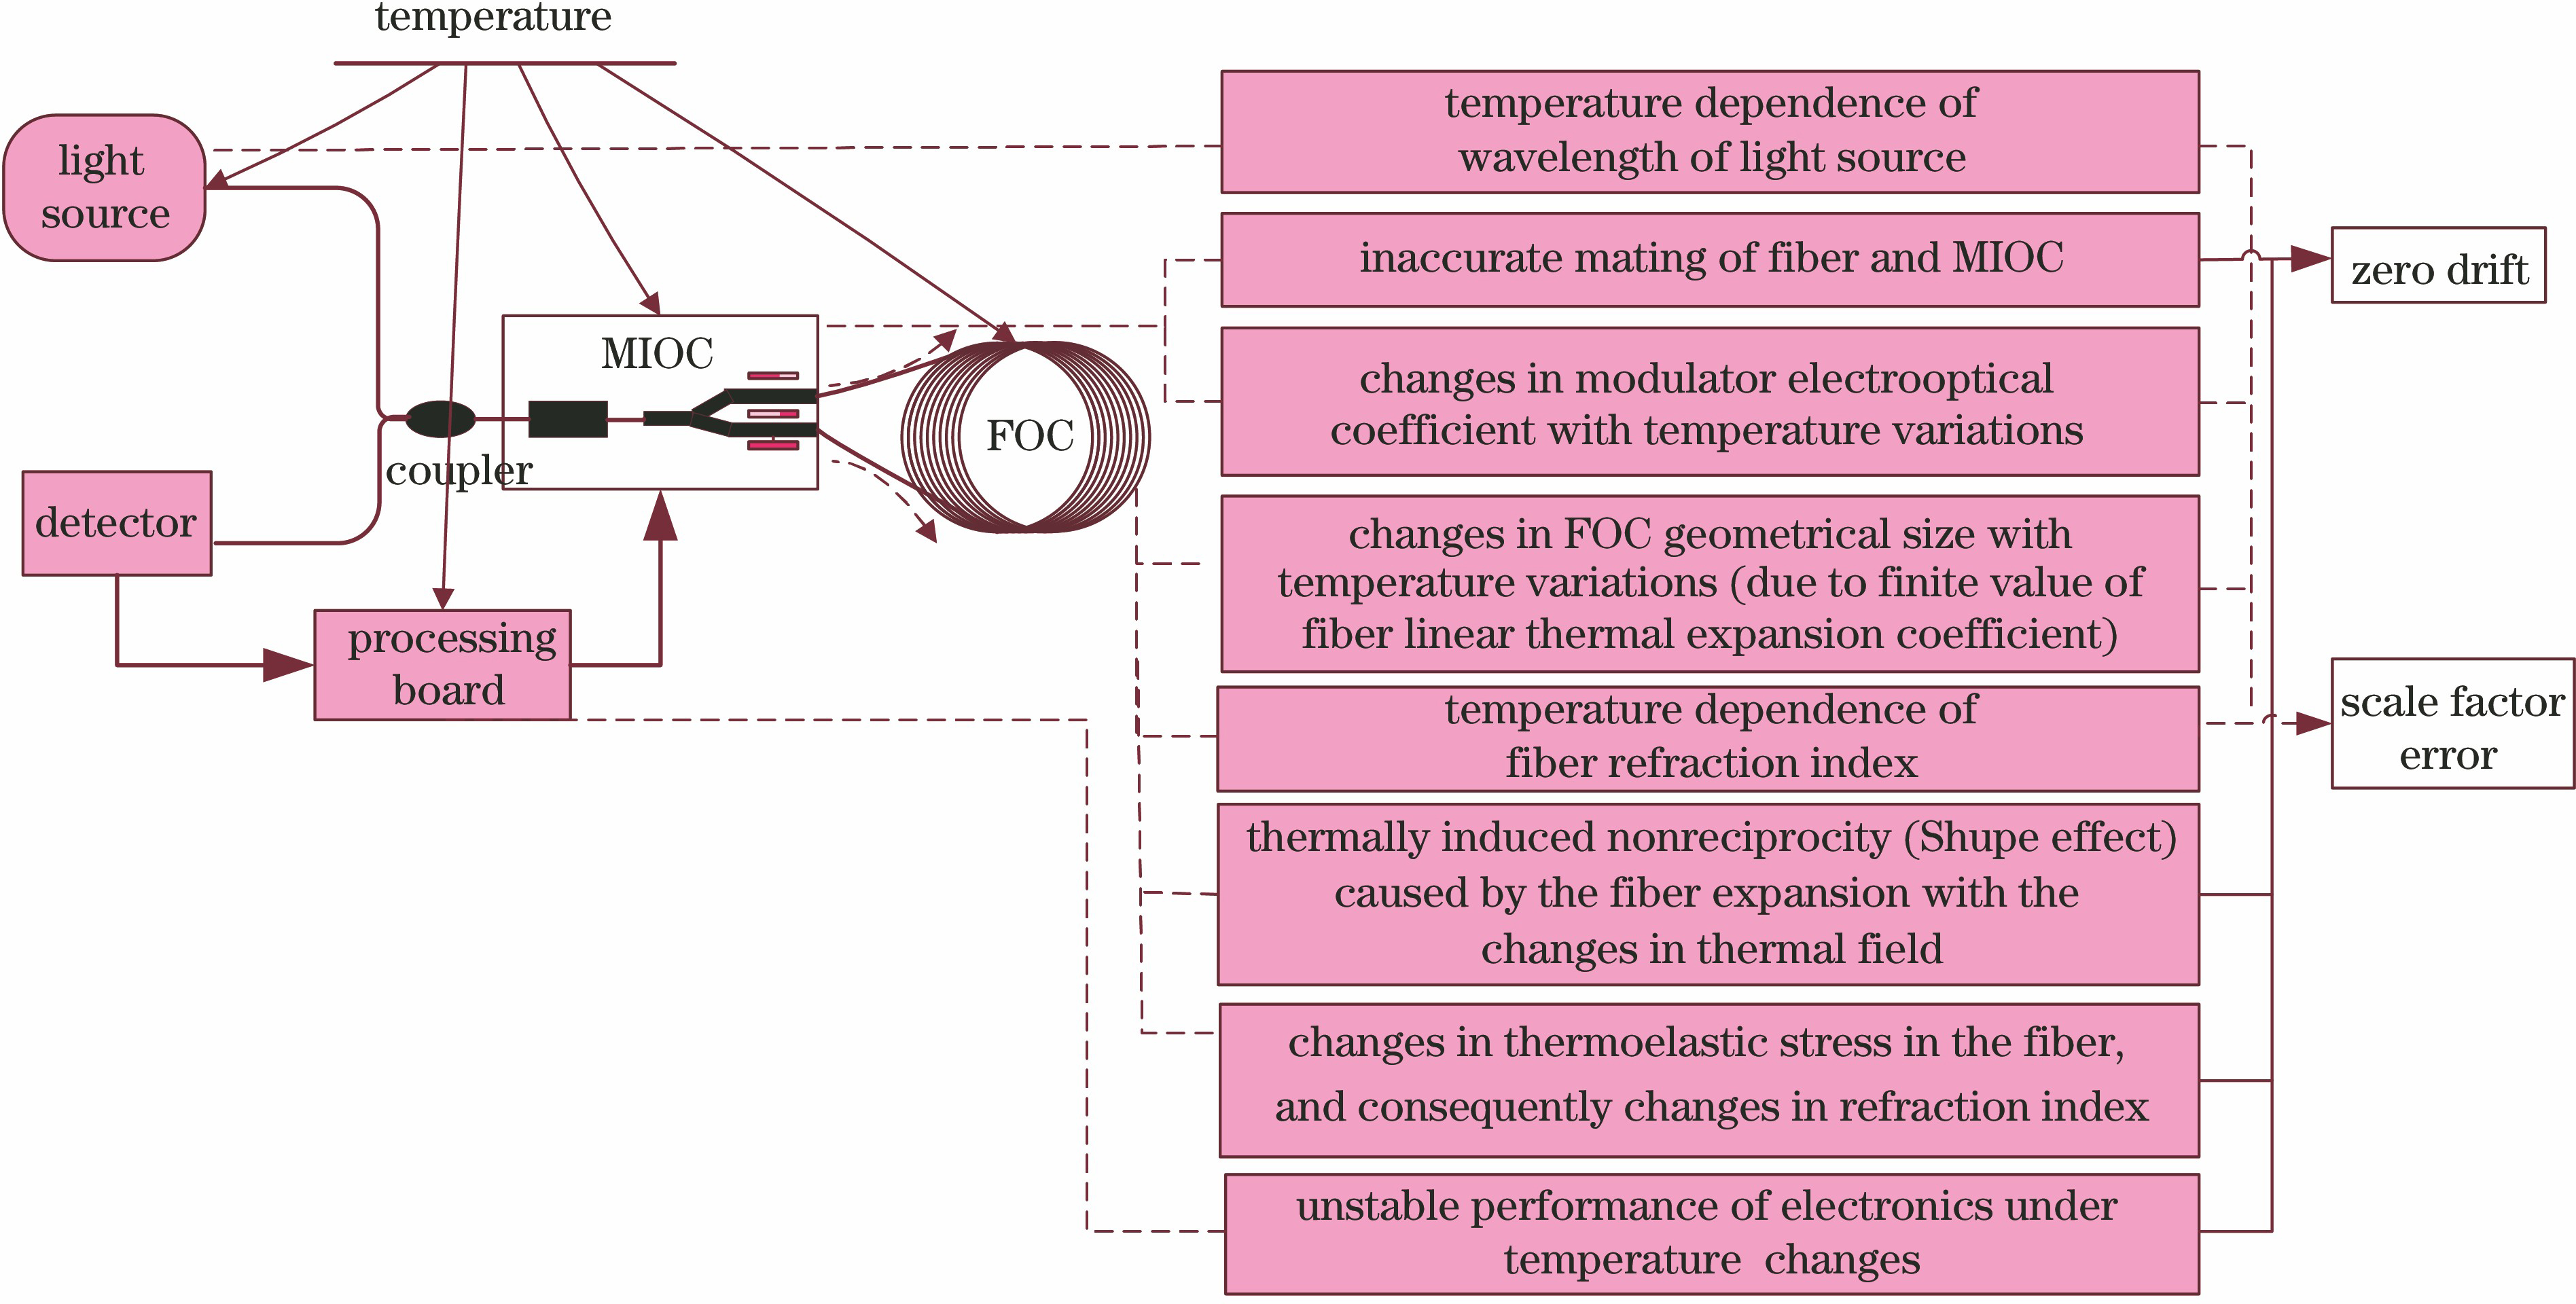 Principal components and mechanisms of FOG affected by temperatures